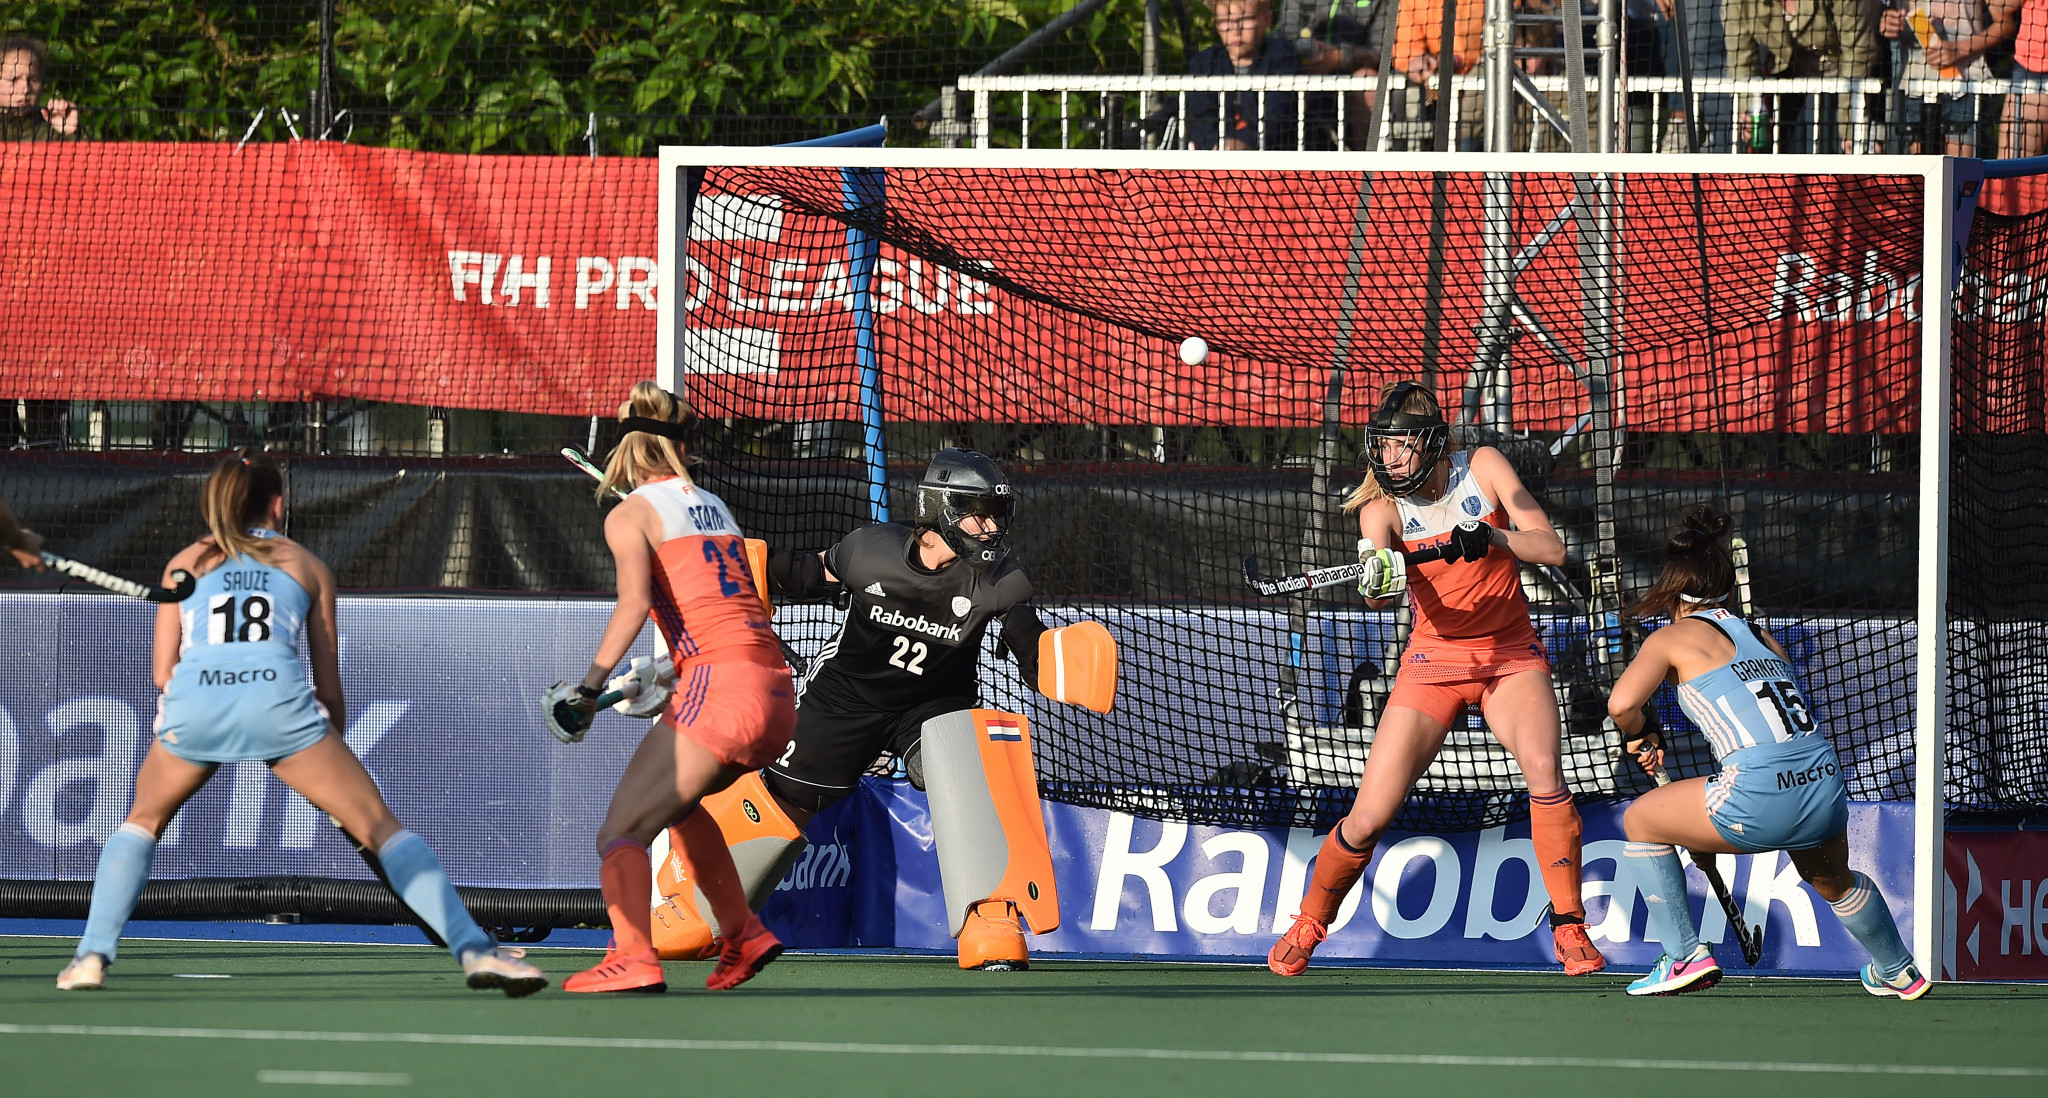 Netherlands clinch top spot in women's FIH Pro League with victory over Argentina